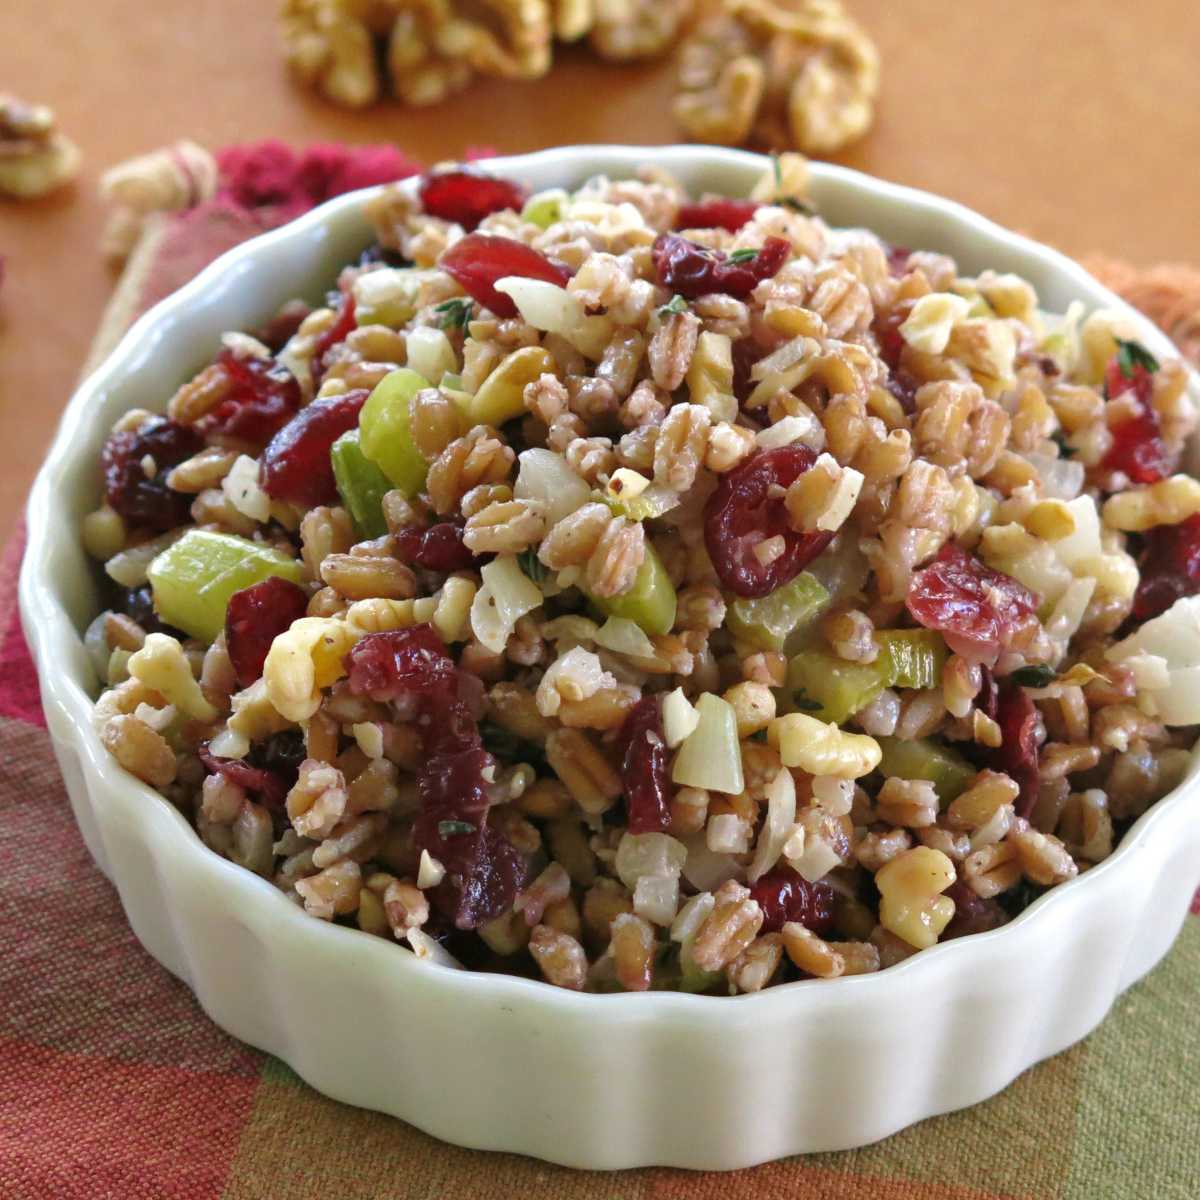 Farro stuffing with cranberries, walnuts, onion, and celery in a serving bowl.